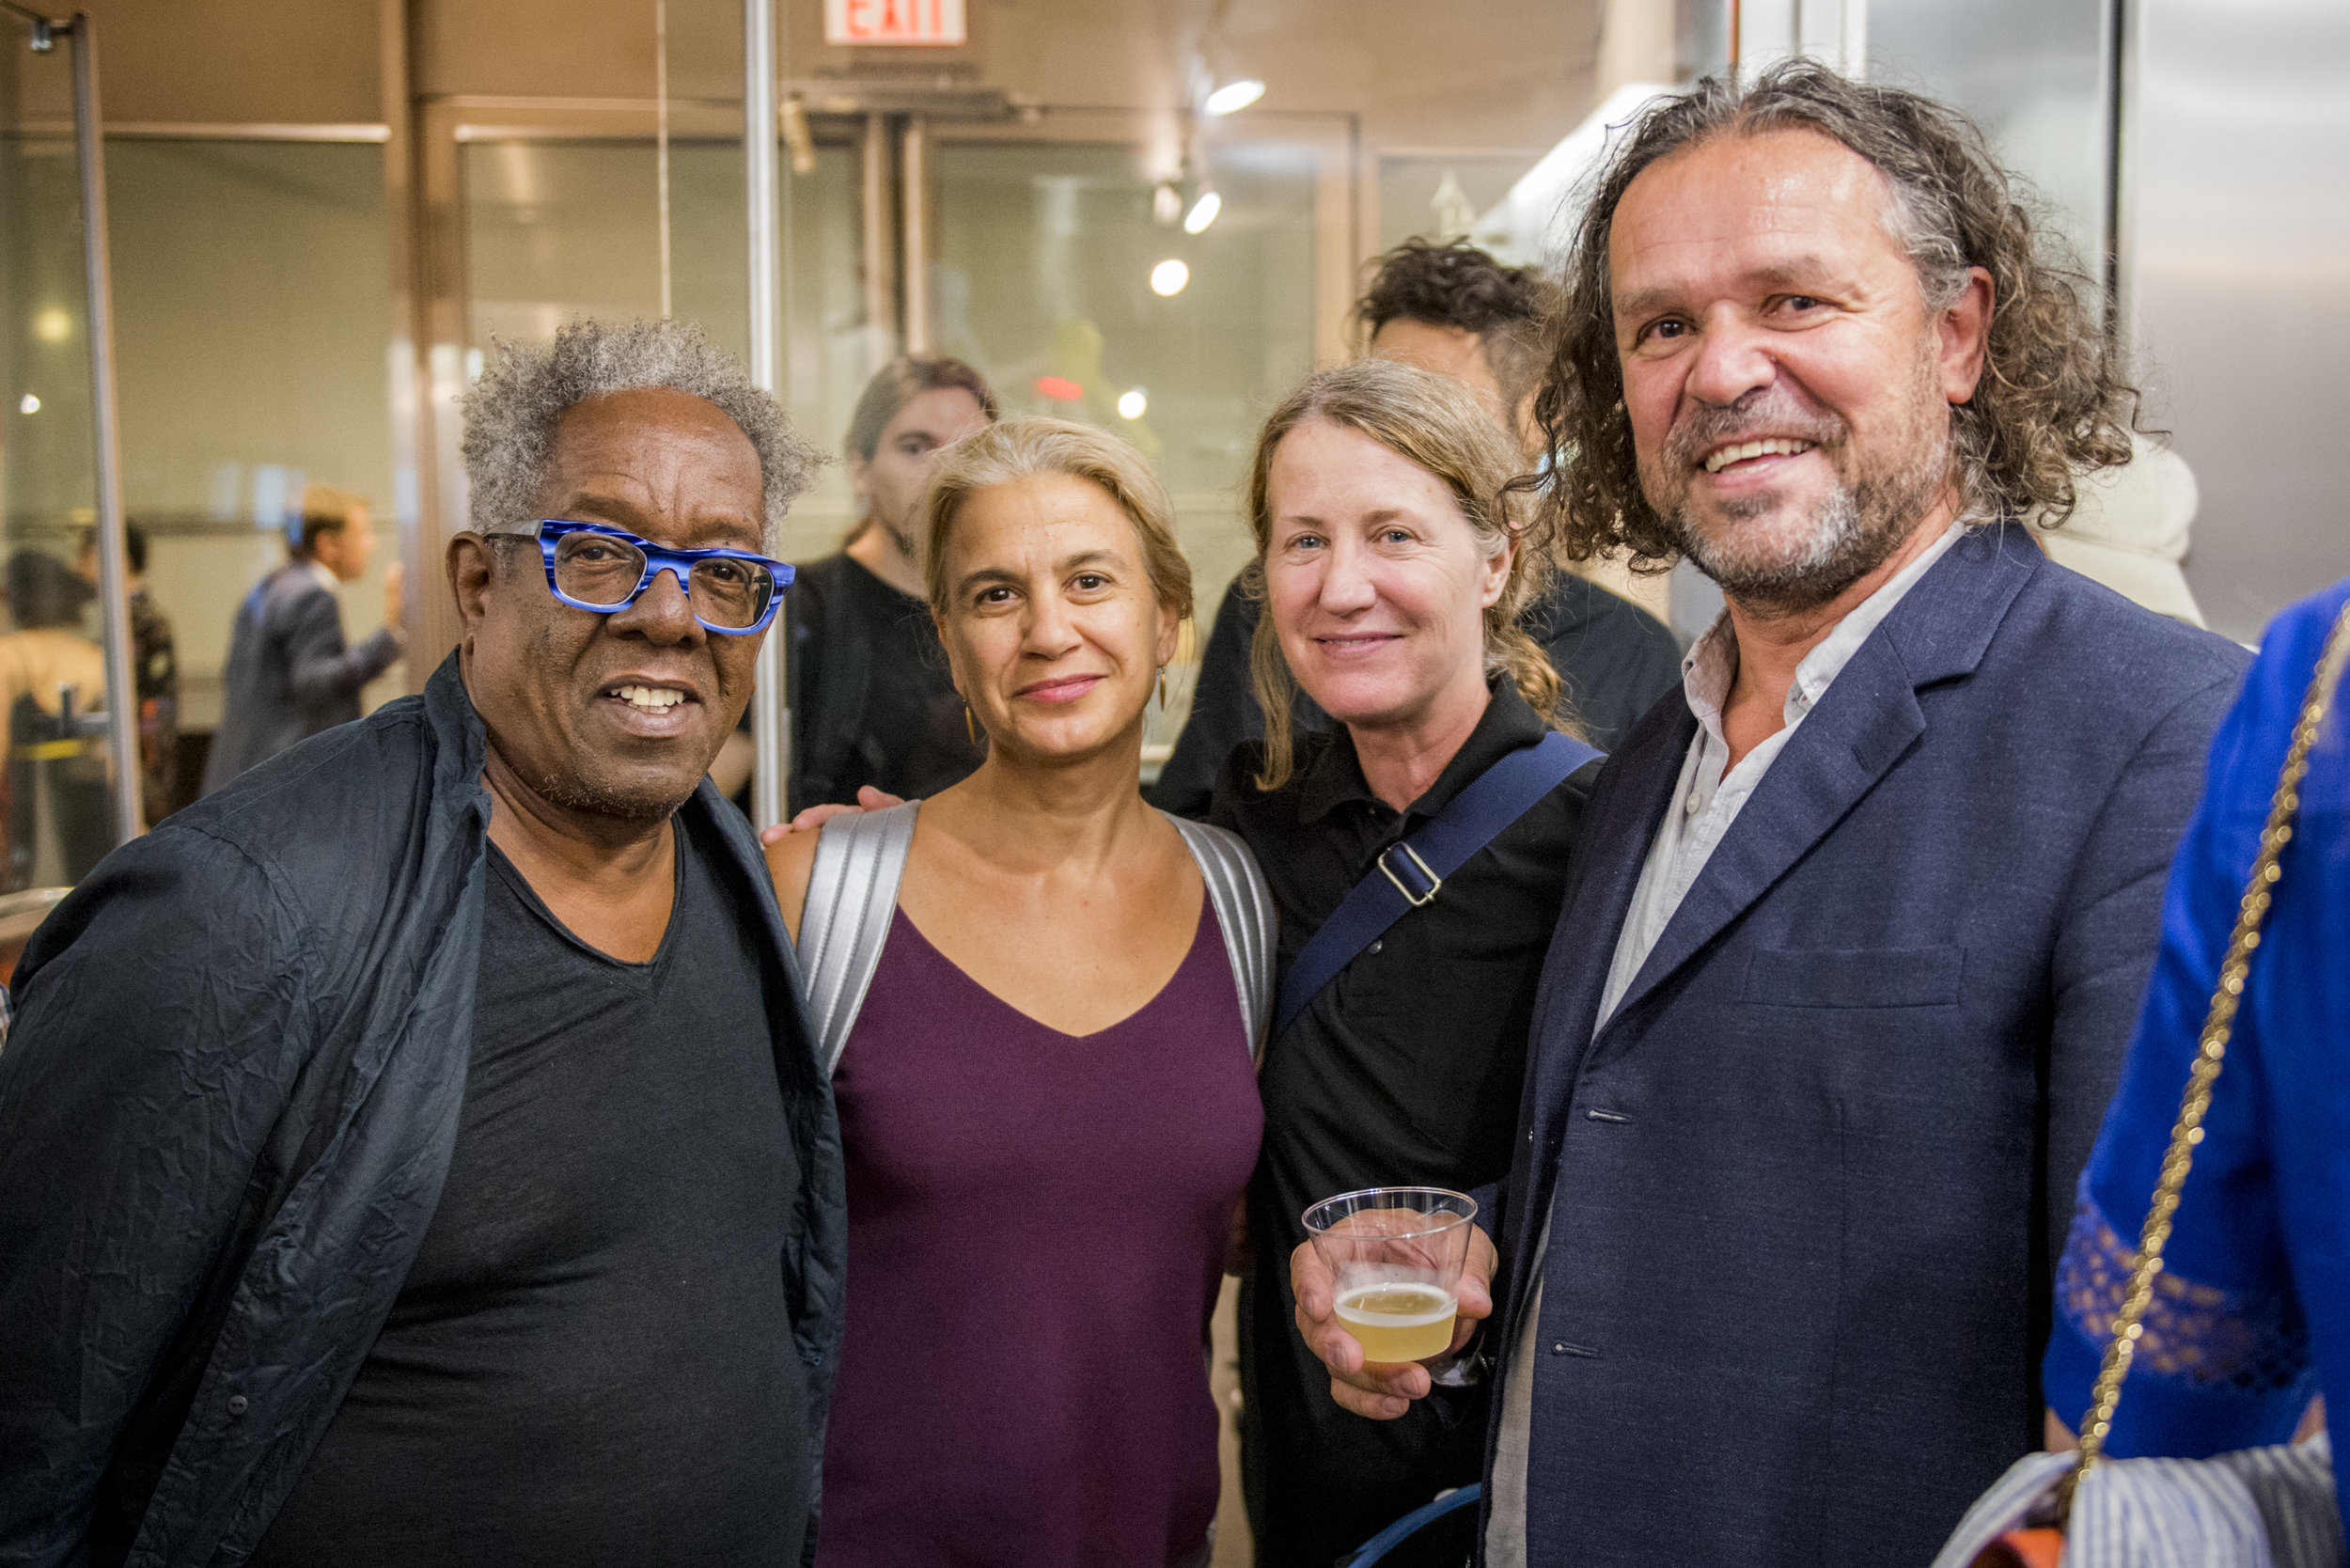   WILD WEST  Opening Reception, September 19, 2017, at the Austrian Cultural Forum New York, Photo: David Plakke/ACFNY 